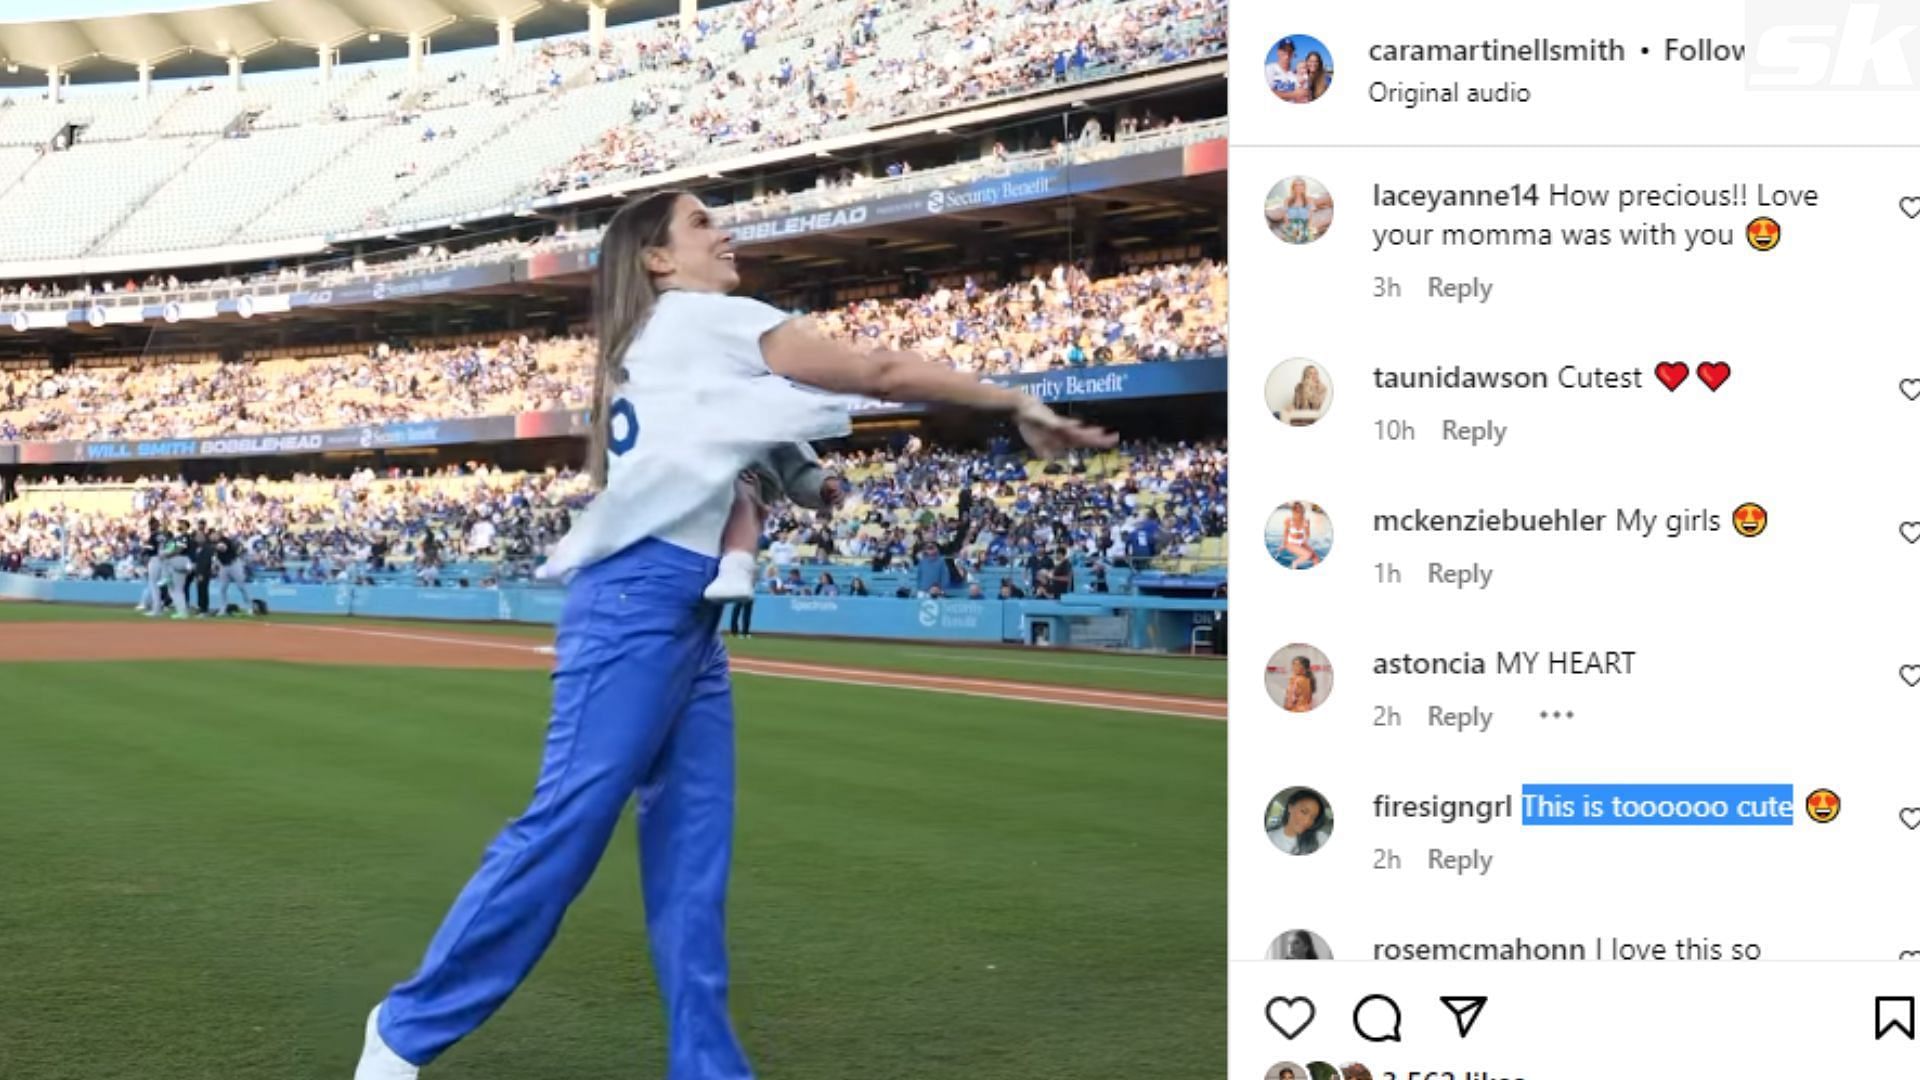 Dodgers pregame: Cara Smith throws first pitch for Will Smith